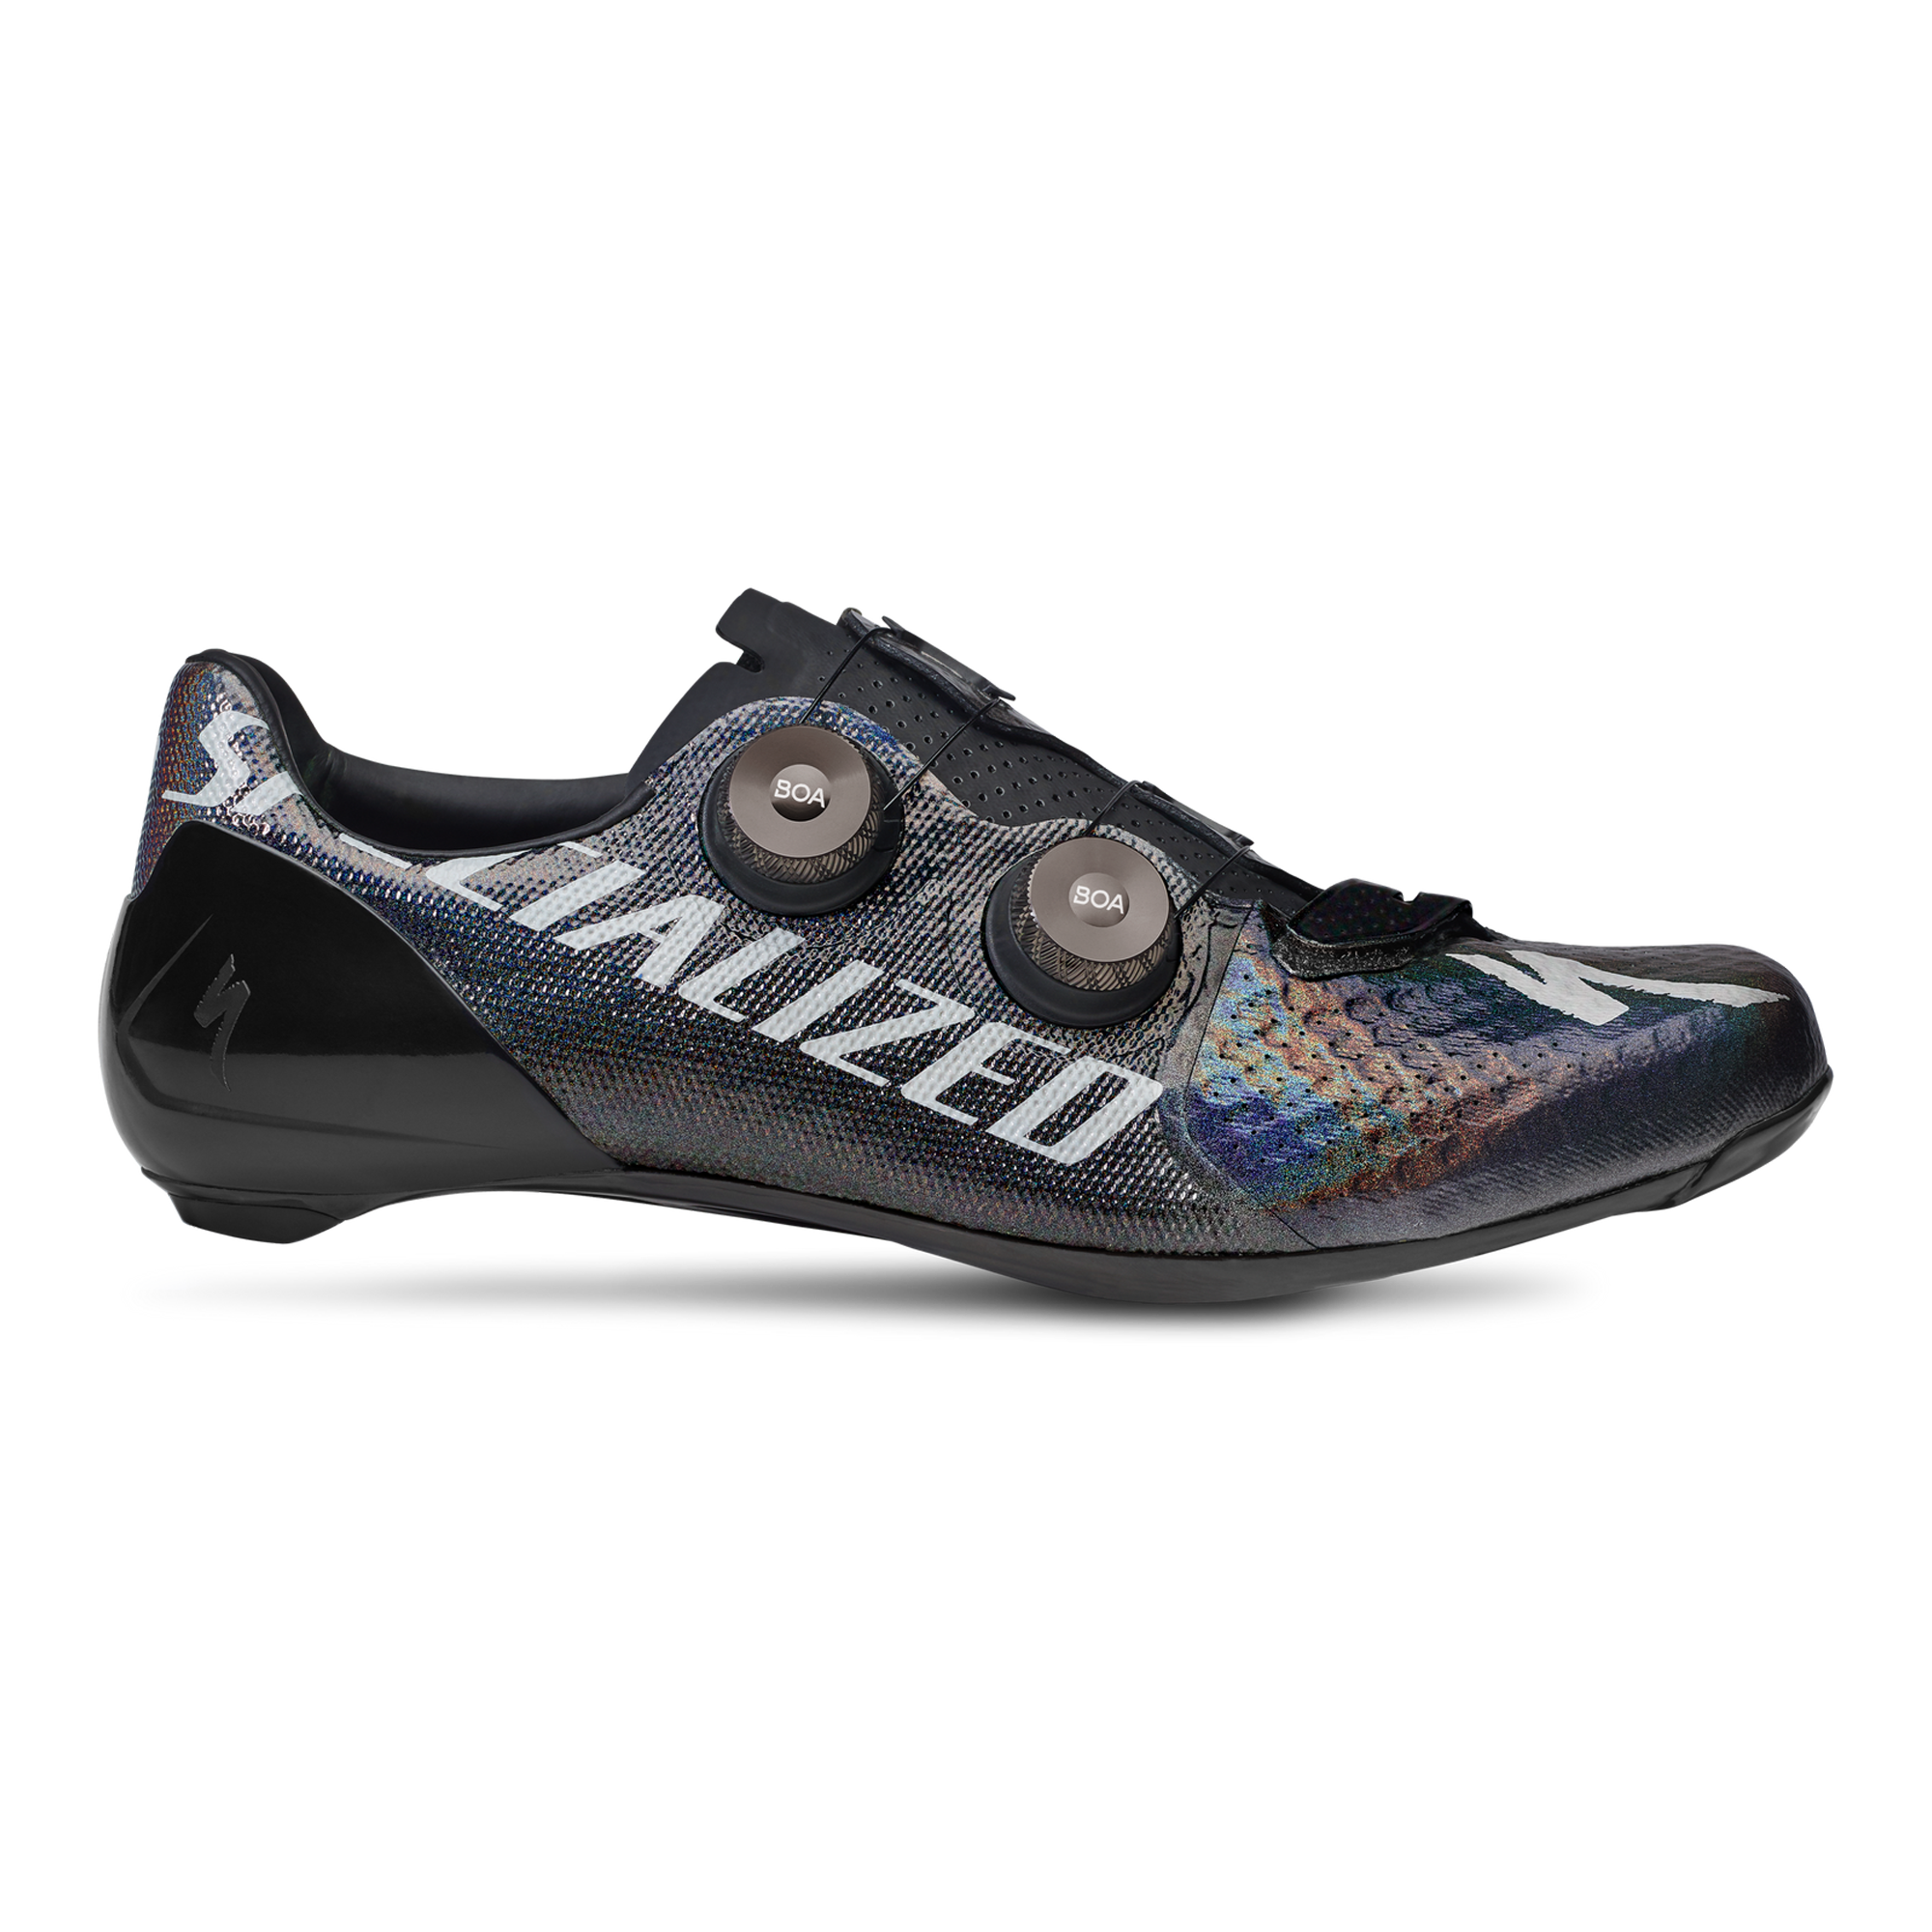 S-Works 7 Road Shoes – Sagan Collection LTD